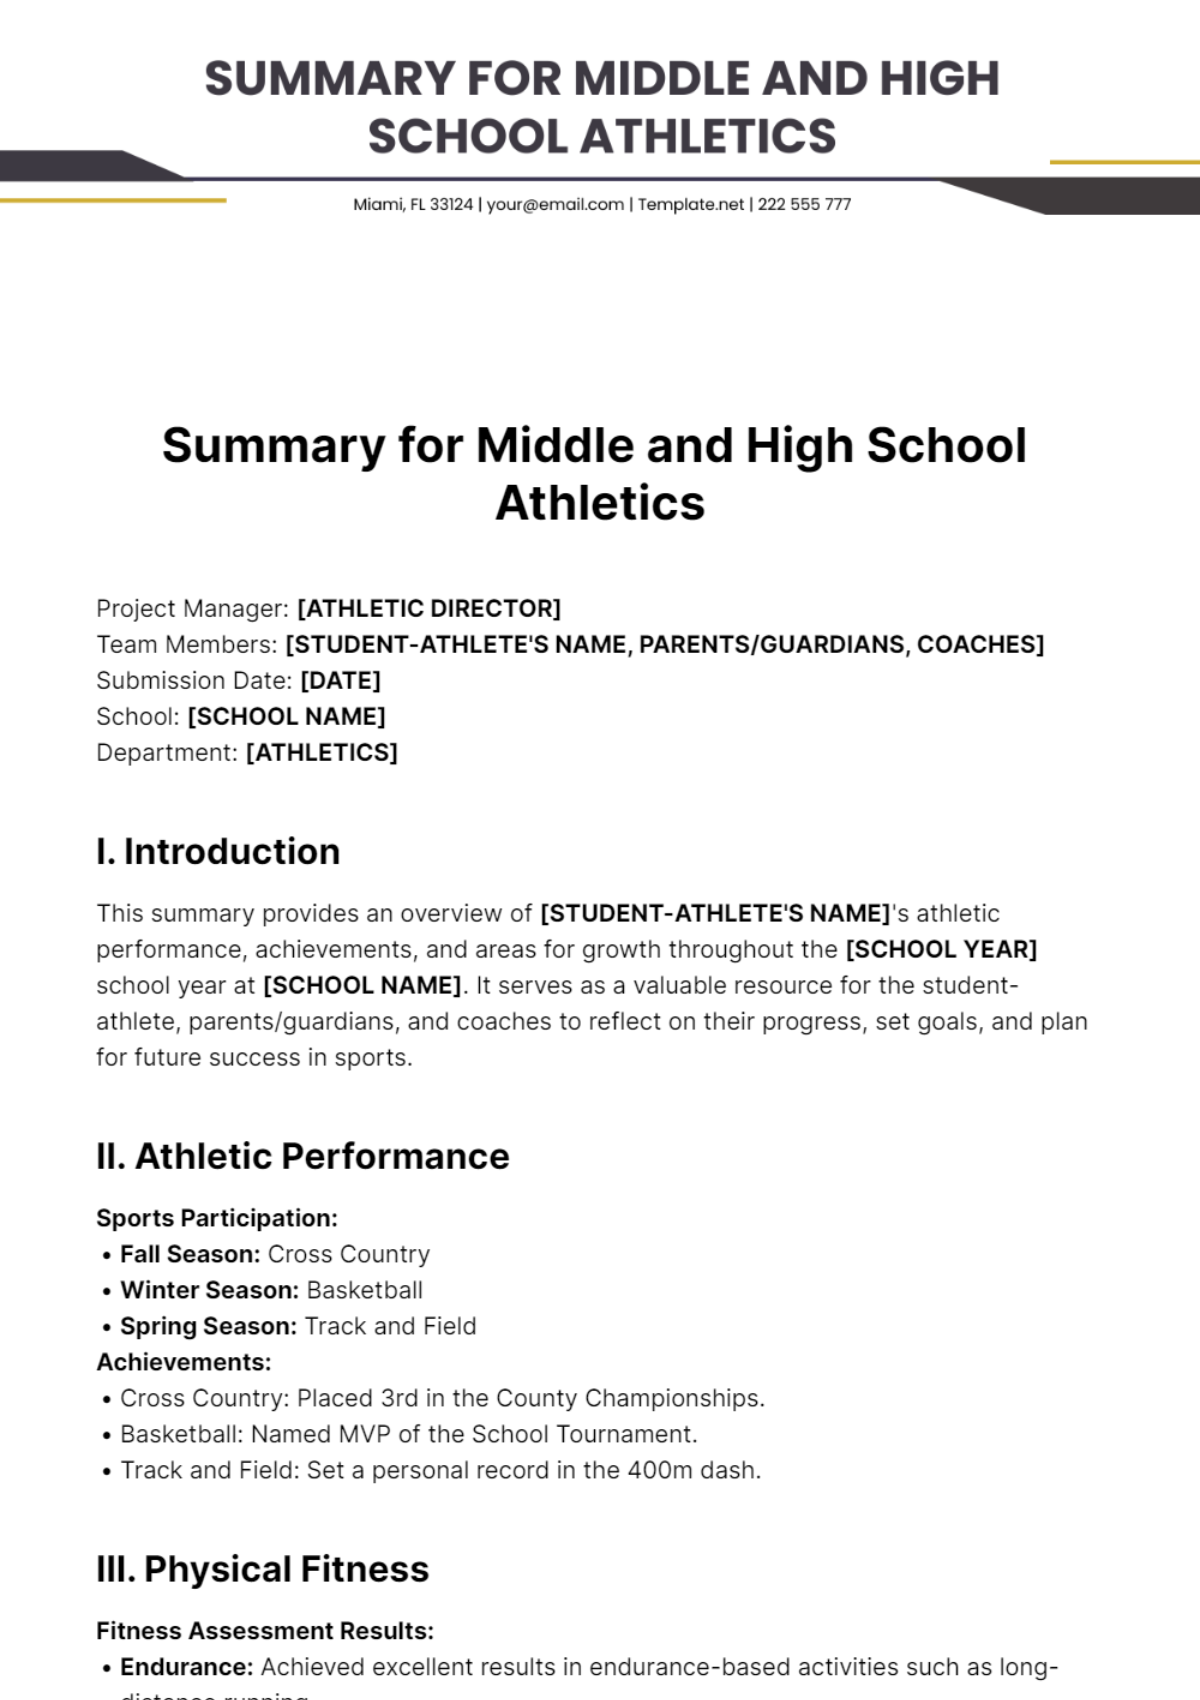 Summary for Middle and High School Athletics Template